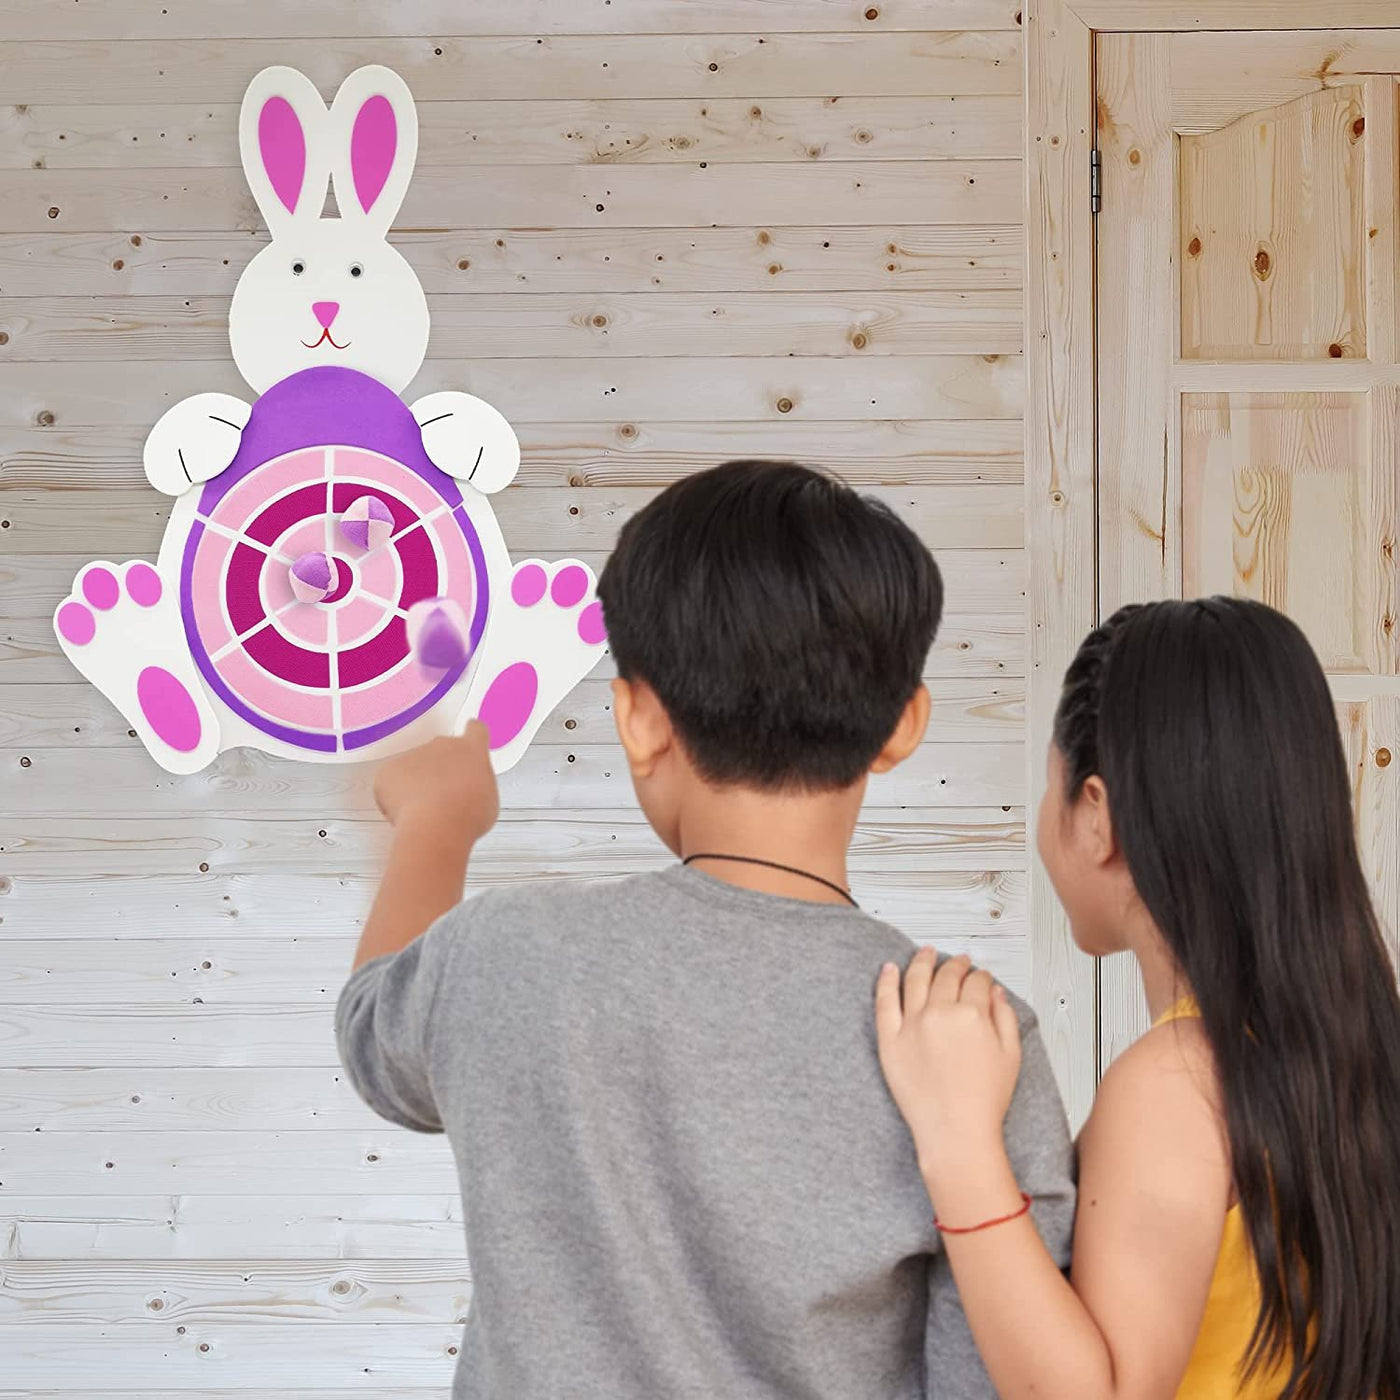 Easter Bunny Egg Dart Board Sticky Balls Toys Games Dart Board Kit with 3 Sticky Balls for Indoor and Outdoor Sports Games